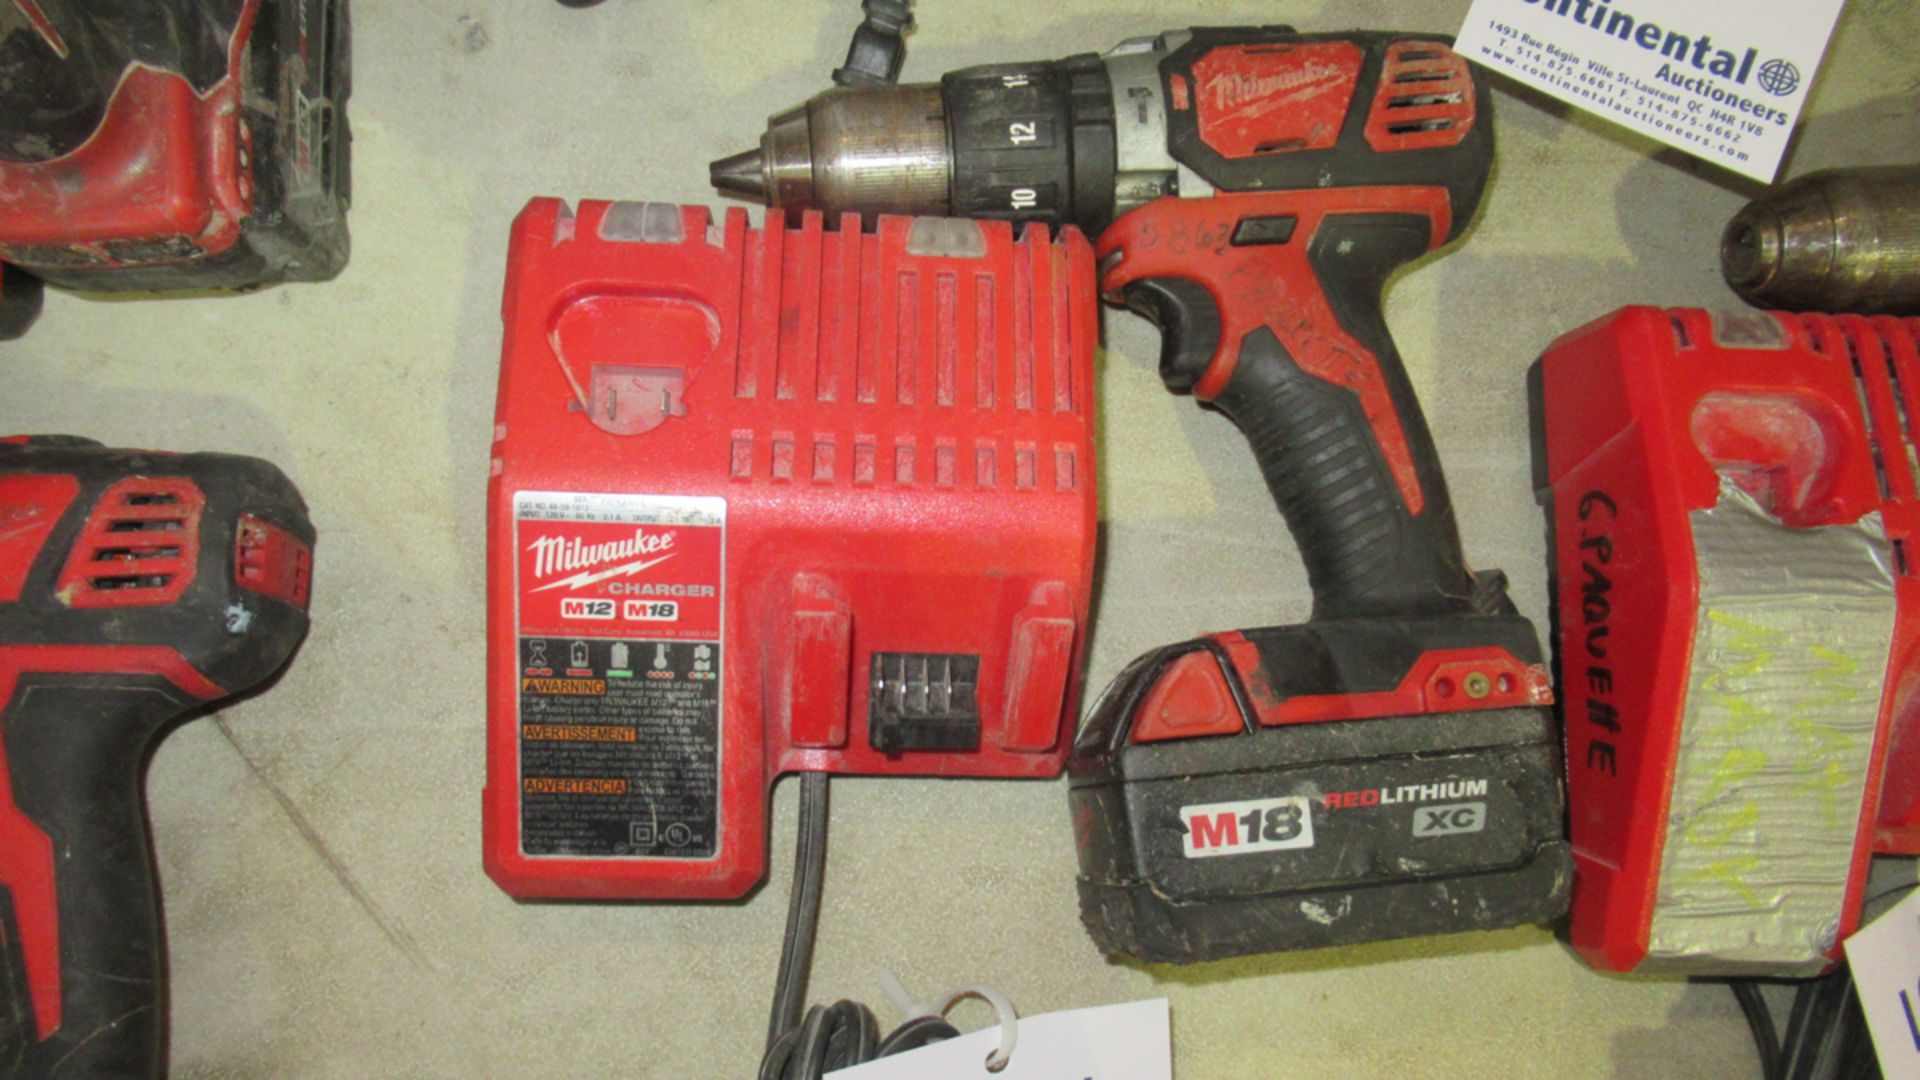 MILWAUKEE M18 CORDLESS DRILL W/ BATTERY & CHARGER